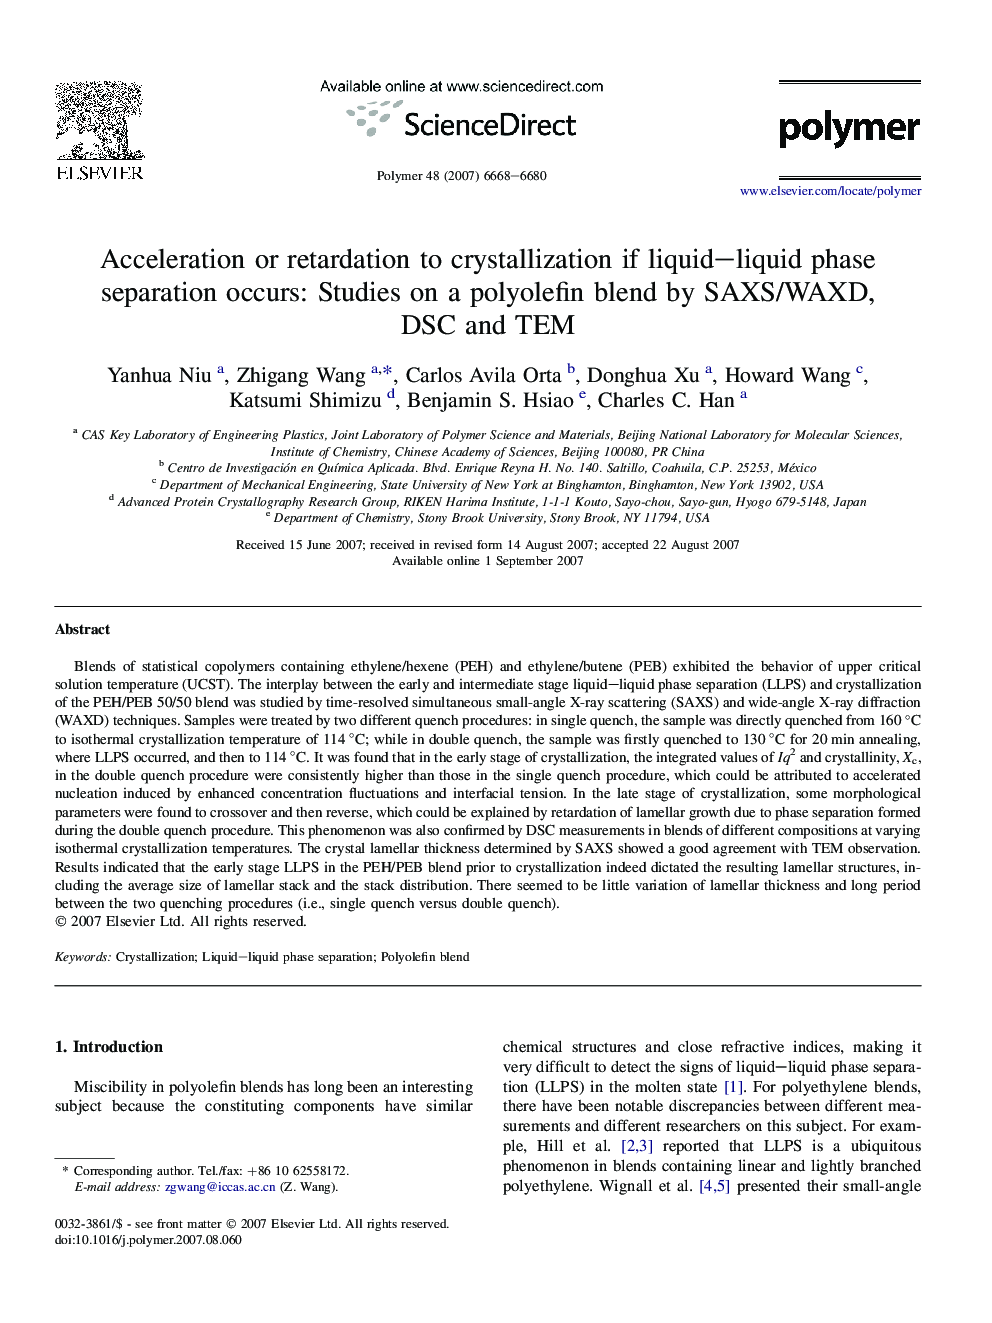 Acceleration or retardation to crystallization if liquid-liquid phase separation occurs: Studies on a polyolefin blend by SAXS/WAXD, DSC and TEM